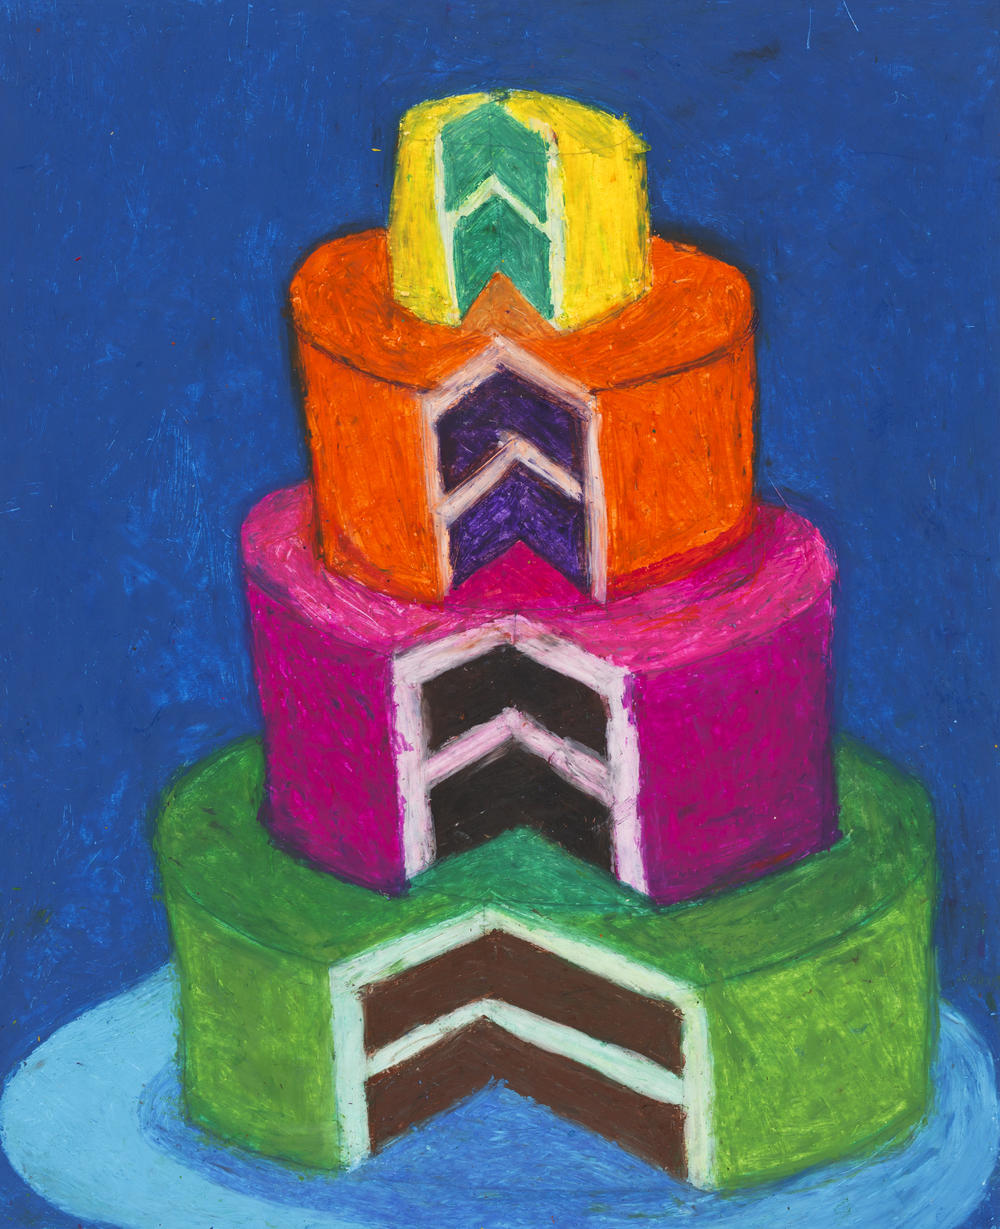 An oil pastel by Camille Holvoet as seen in<em> Art Is Art. </em>